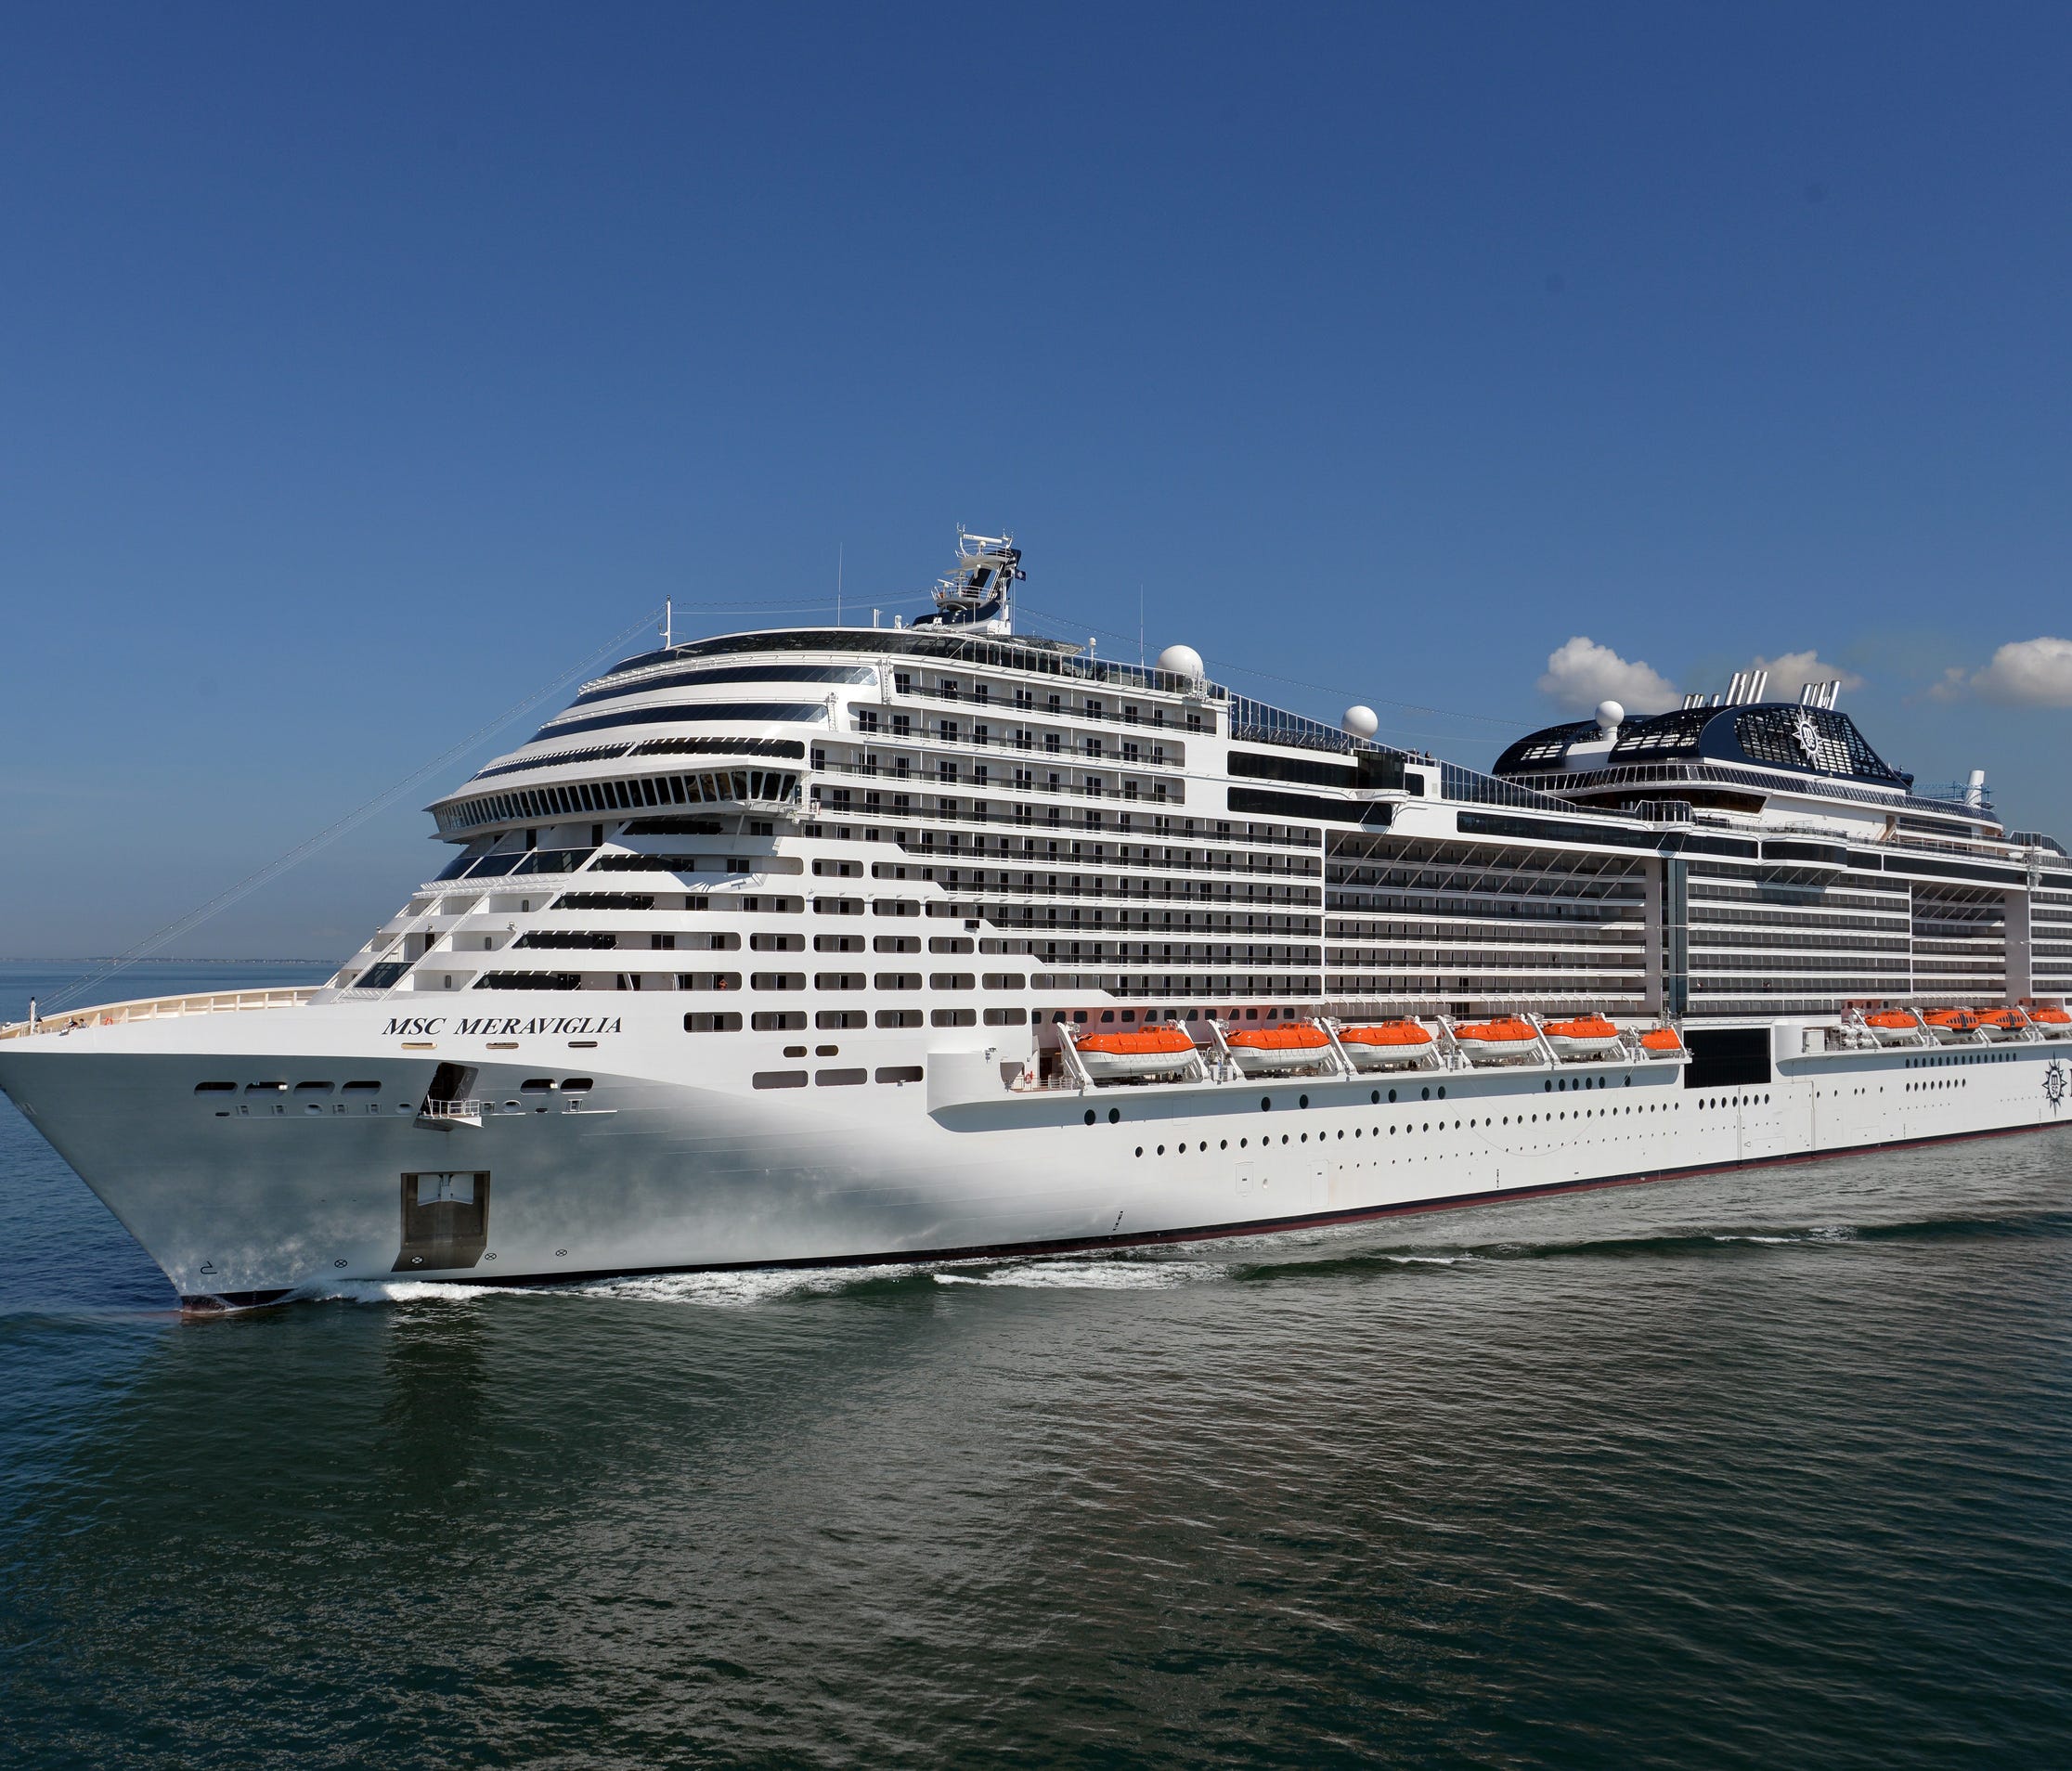 Another line that has been rolling out bigger and boxier ships in recent years is MSC Cruises. Here, MSC Cruises' new MSC Meraviglia, the fourth largest cruise ship in the world.